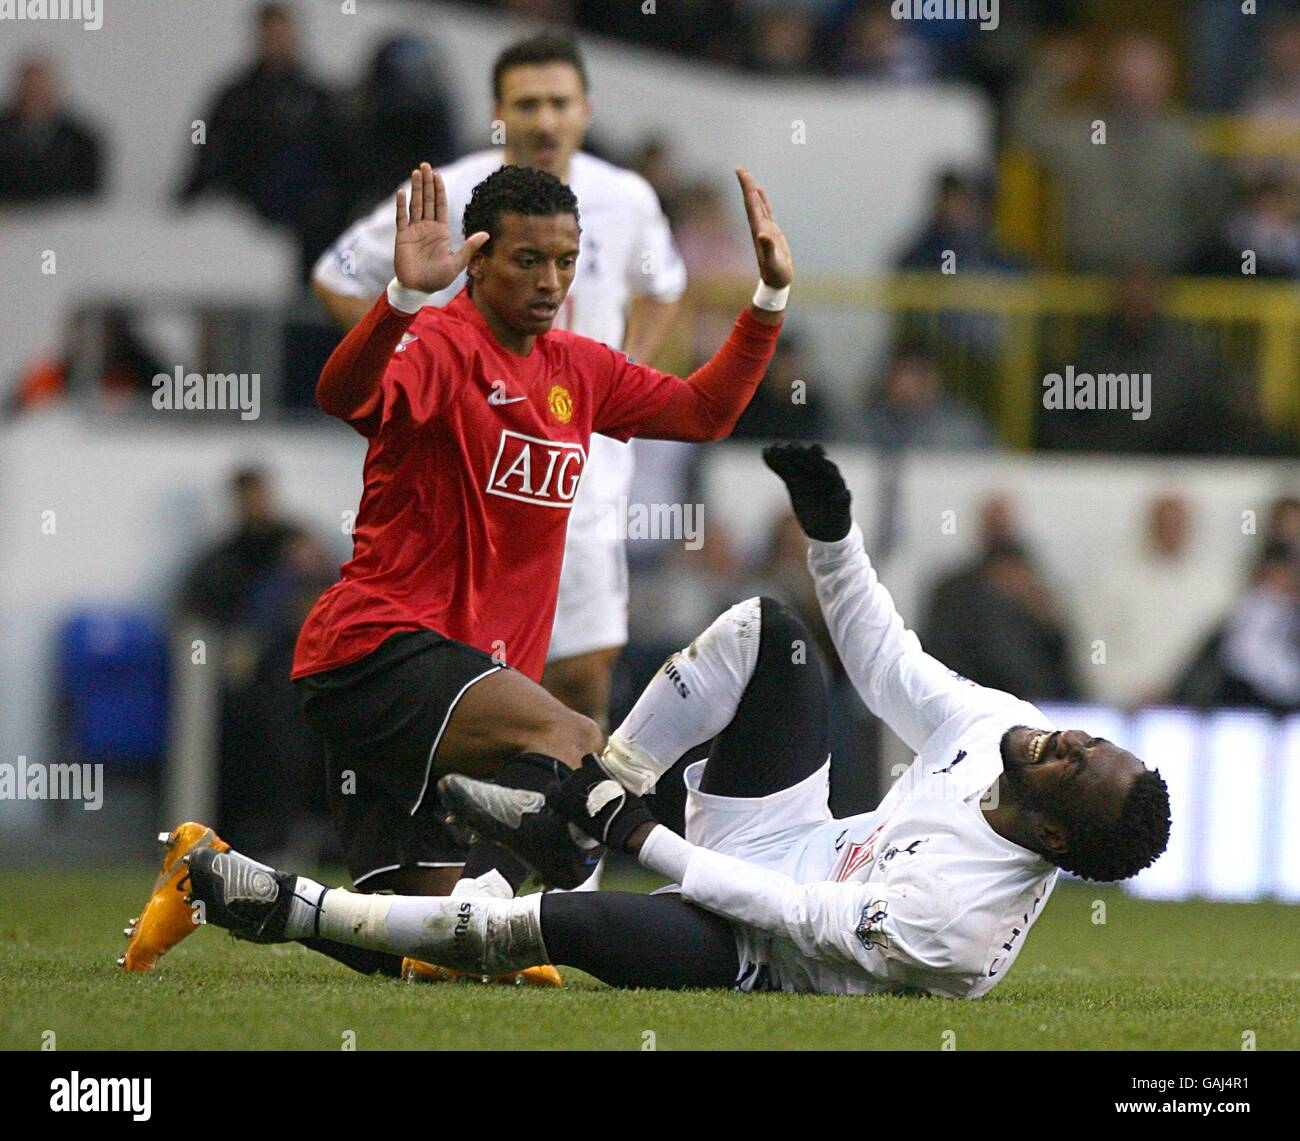 Manchester United's Luis Nani holds his hands up and apologises following his challenge on Tottenham Hotspur's Pascal Chimbonda Stock Photo